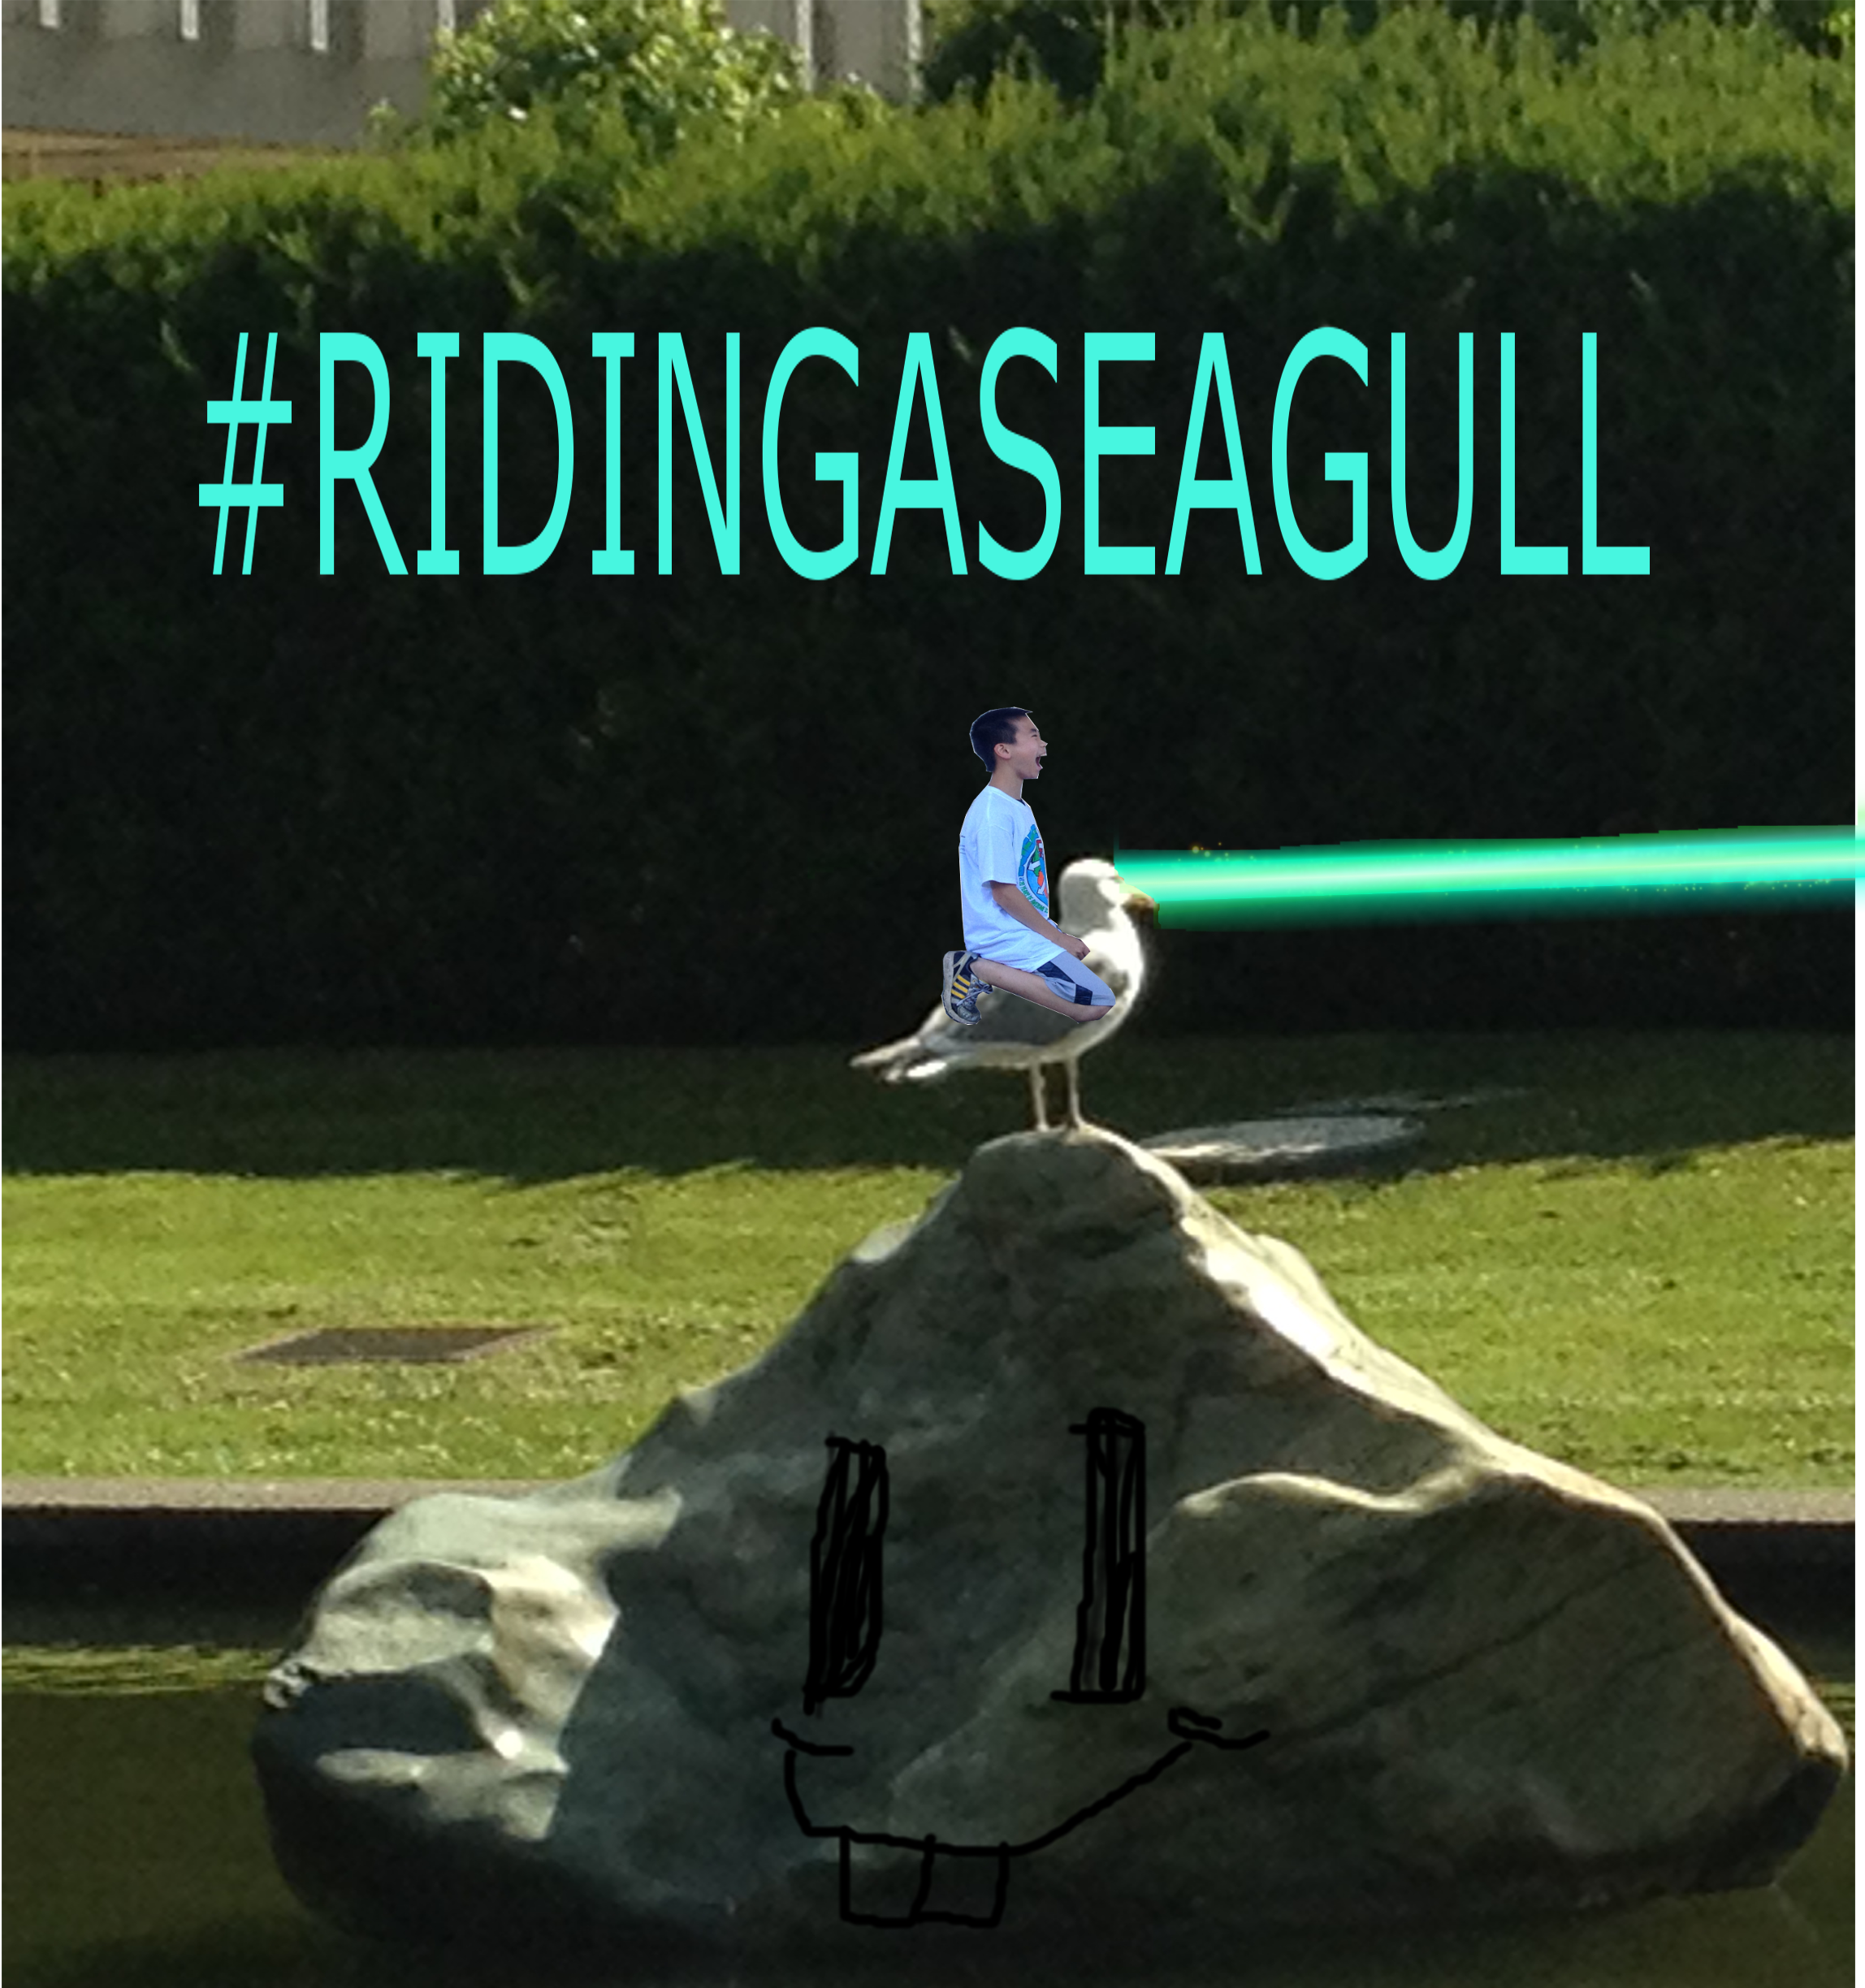 An edited image of a boy riding a seagull that is shooting neon green lasers out of its eyes with the caption #RIDINGASEAGULL